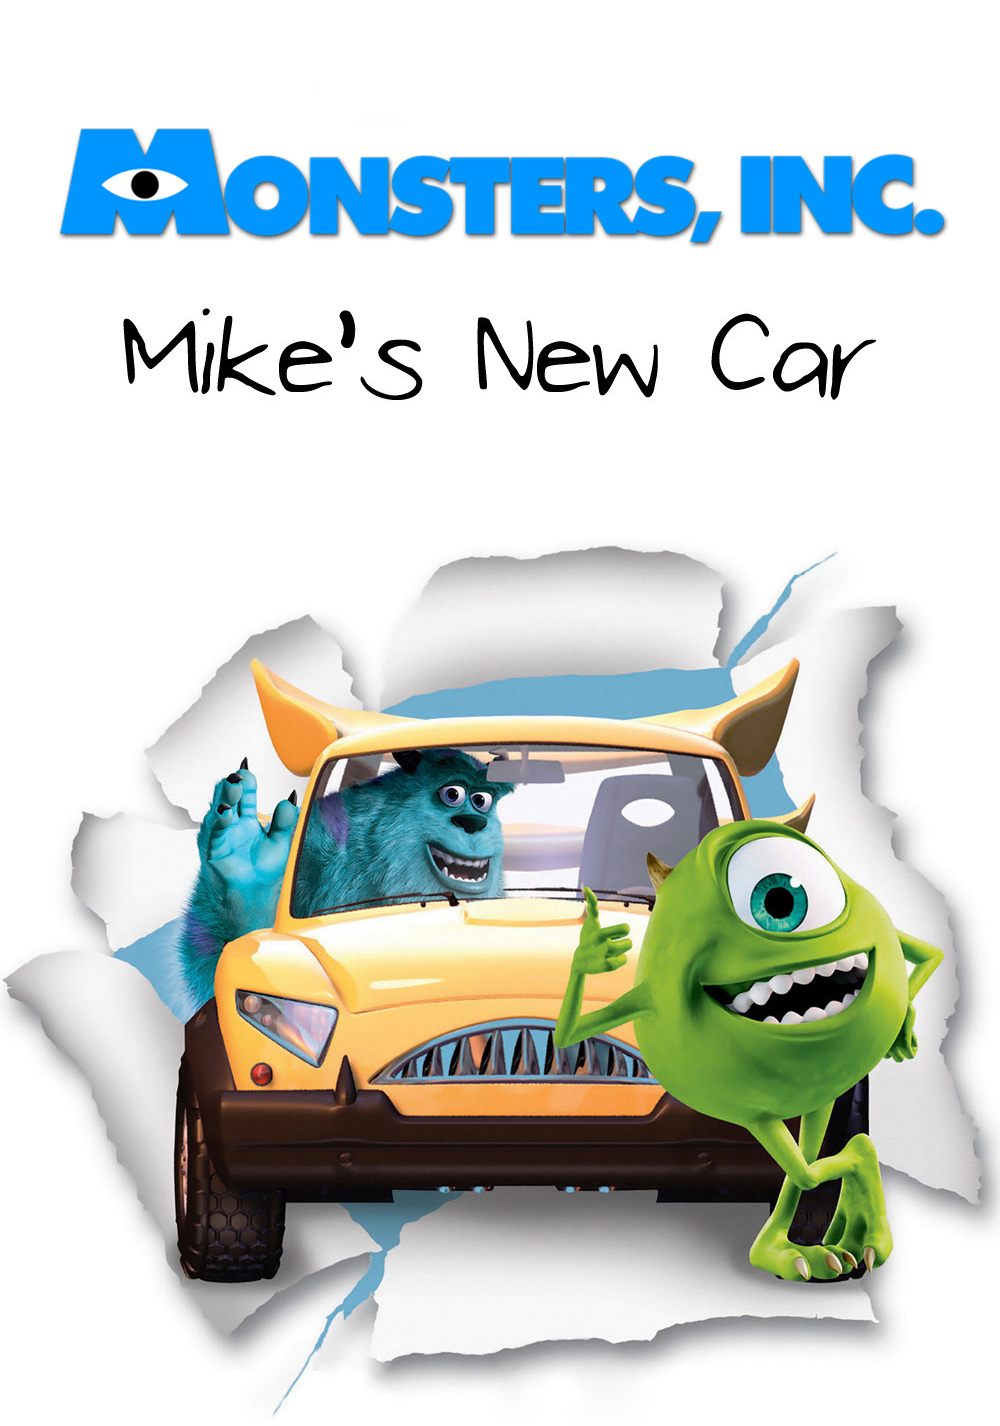 Poster Phim Chiếc Xe Mới Của Mike (Mike's New Car)